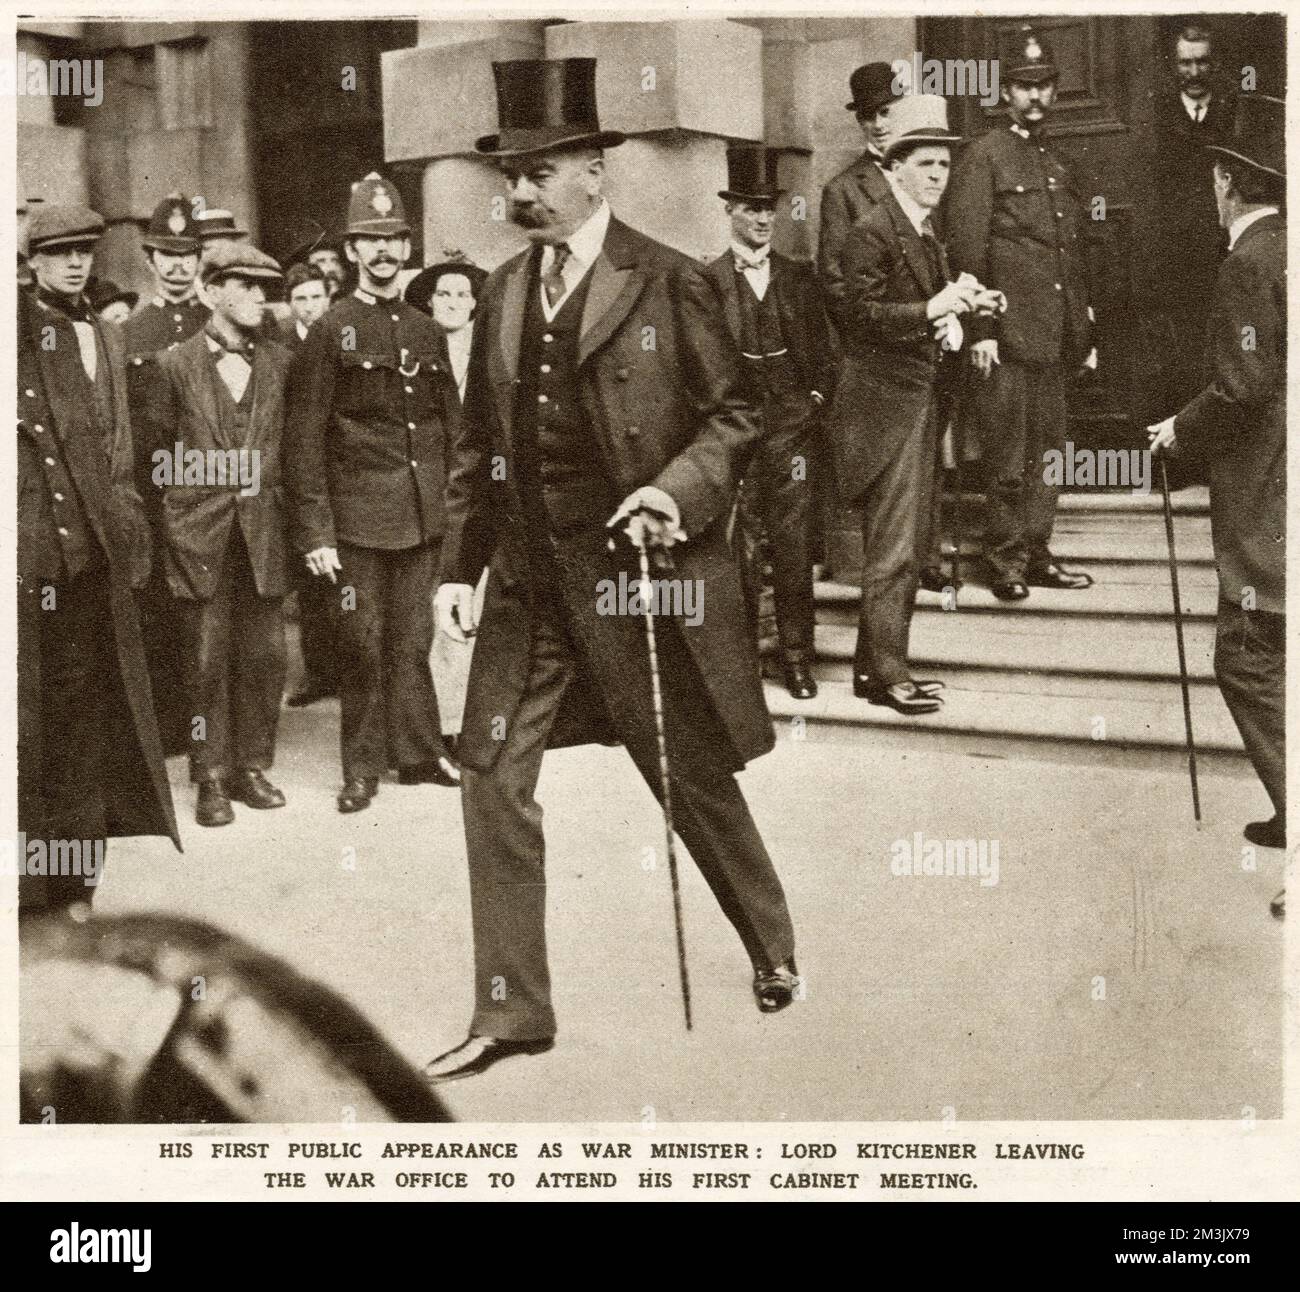 Lord Kitchener (1850 - 1916), in his first public appearance as Secretary for War, leaving the War Office to attend his first cabinet meeting. On the steps in the light-coloured top hat is Mr F E Smith, MP, Chief of the new Press Bureau (responsible for newspaper censorship). Stock Photo